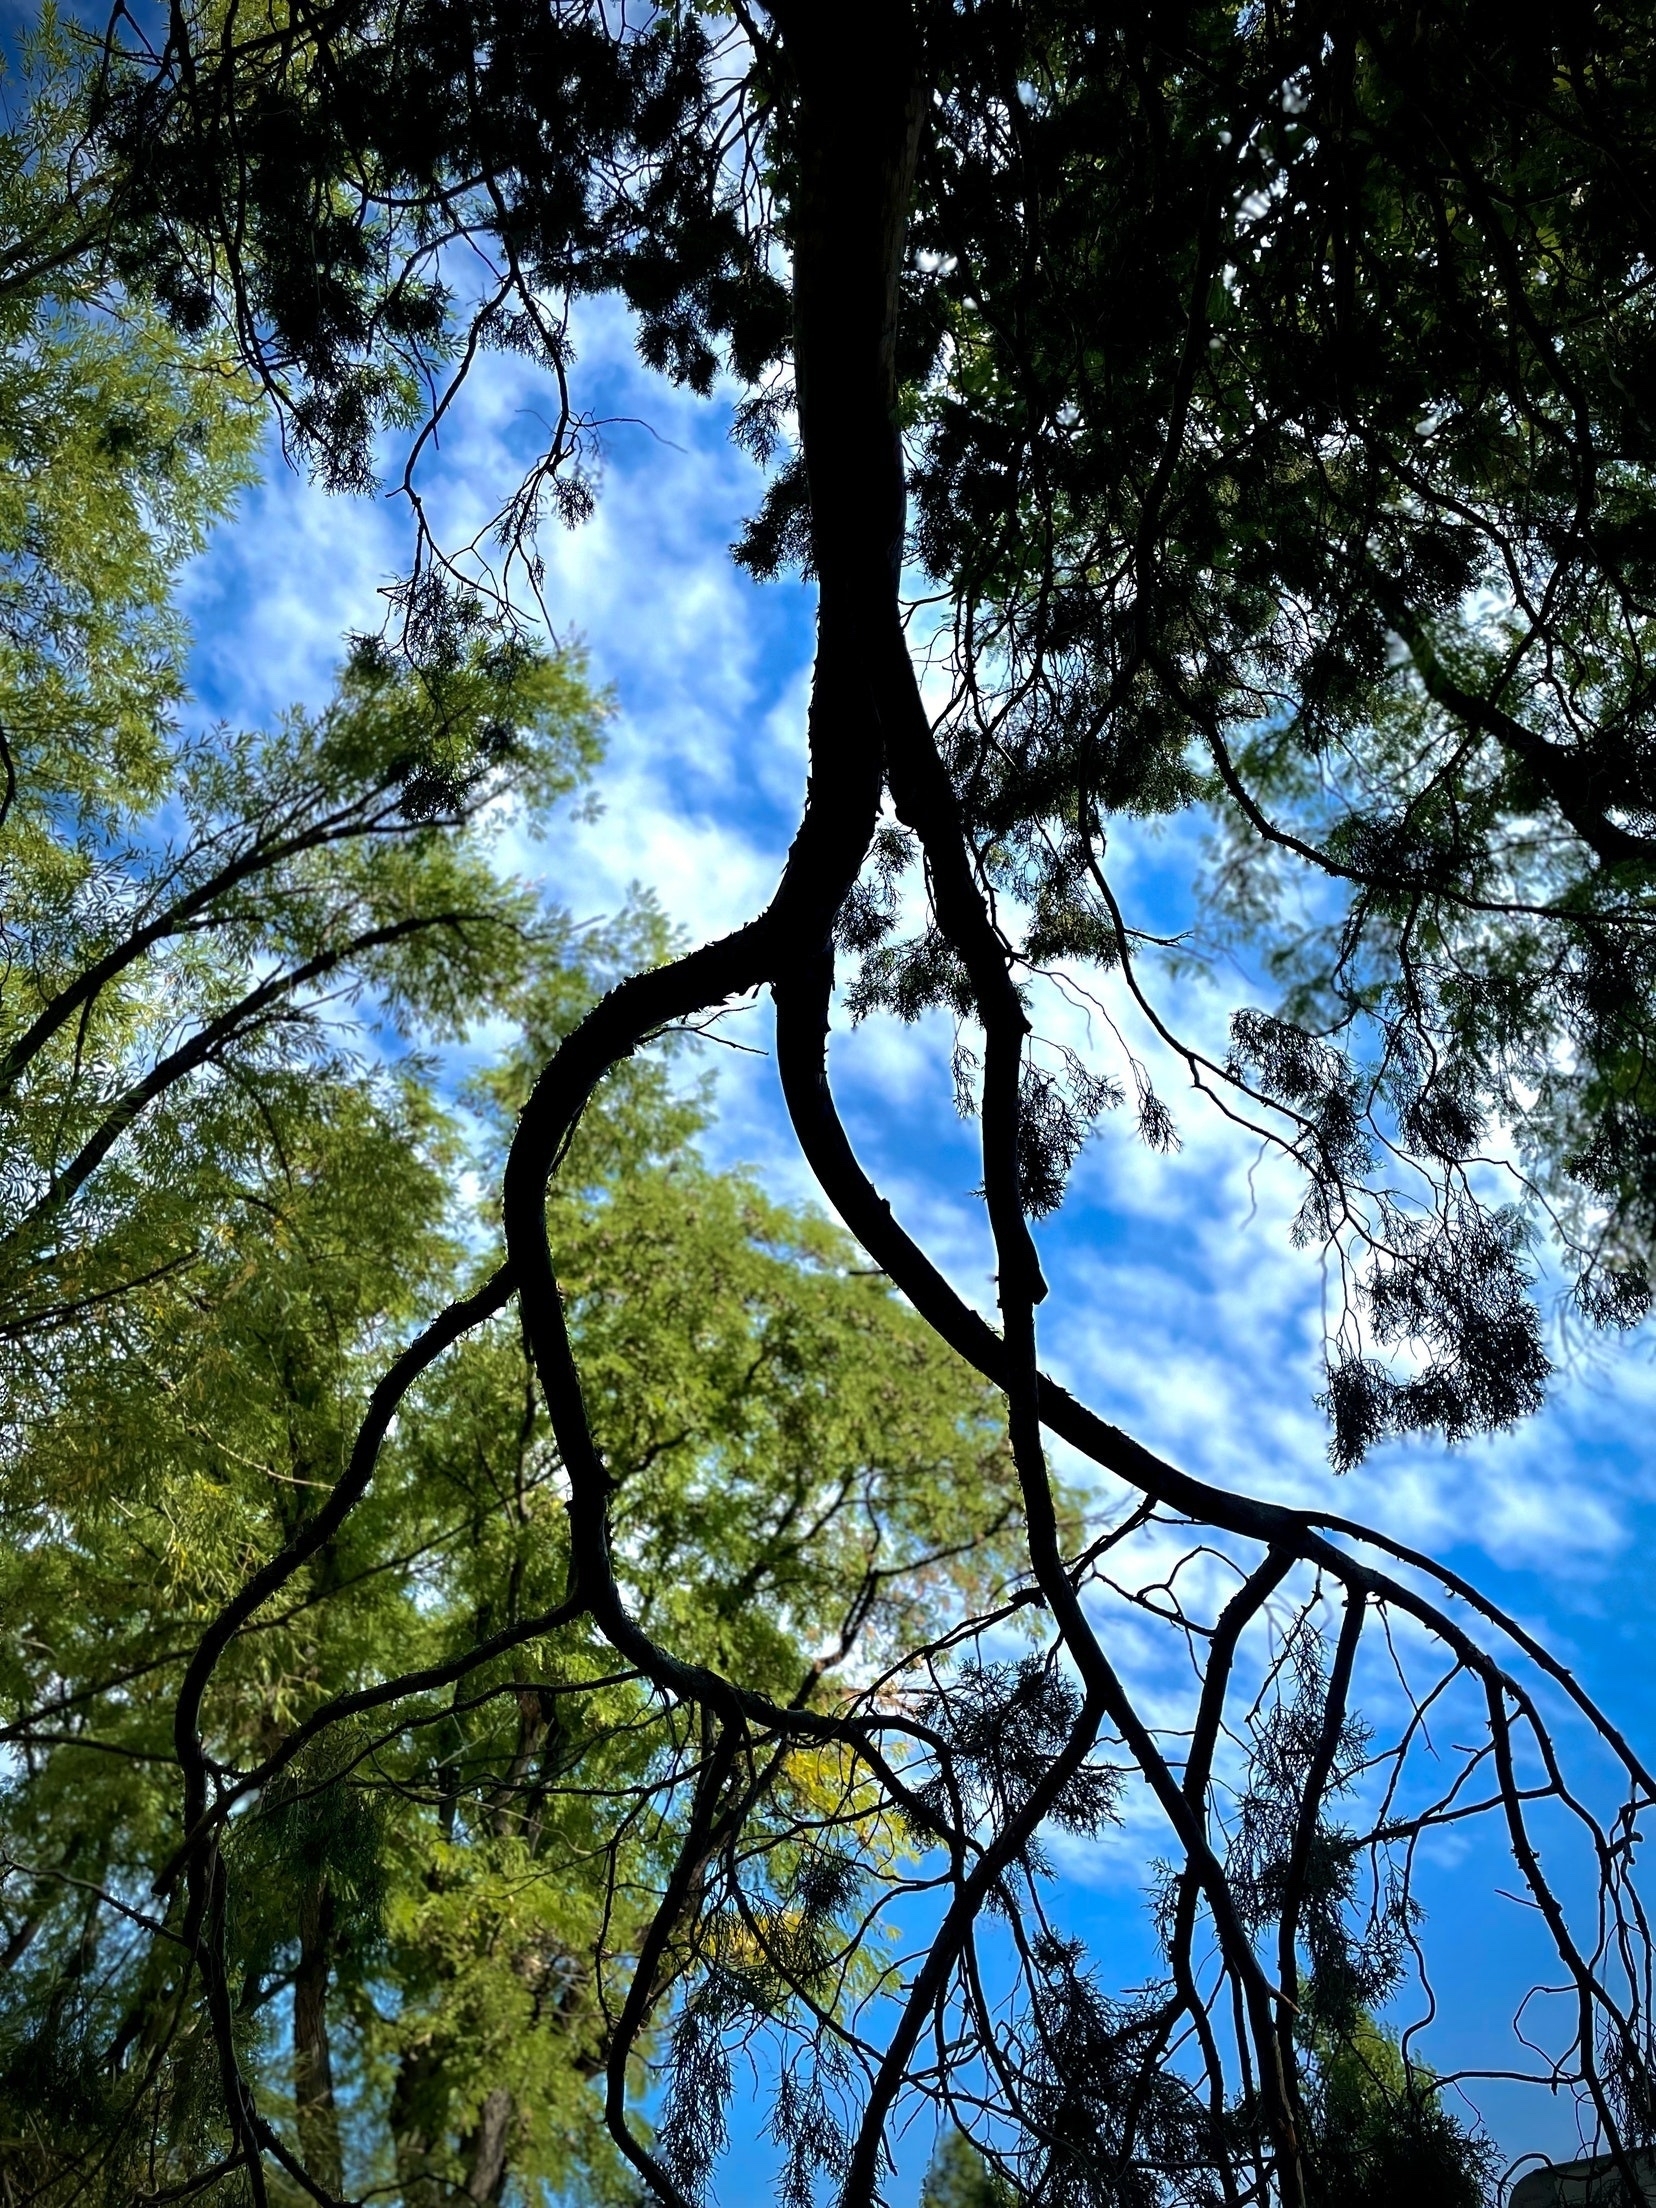 Looking up through a tree to a blue sky.